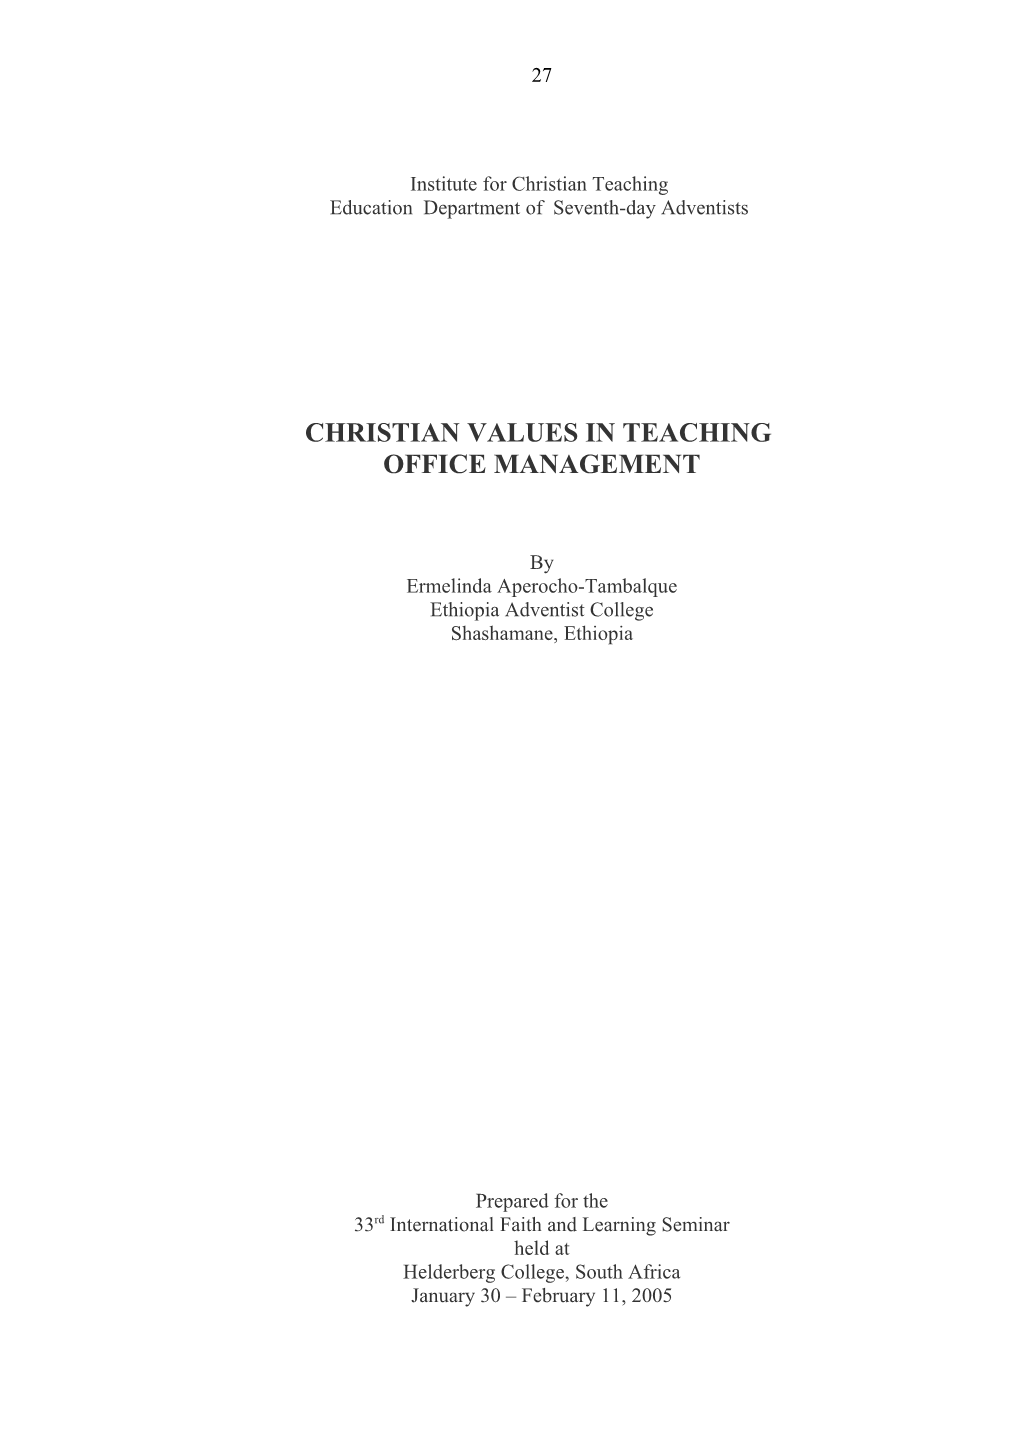 Christian Values in Teaching Office Management